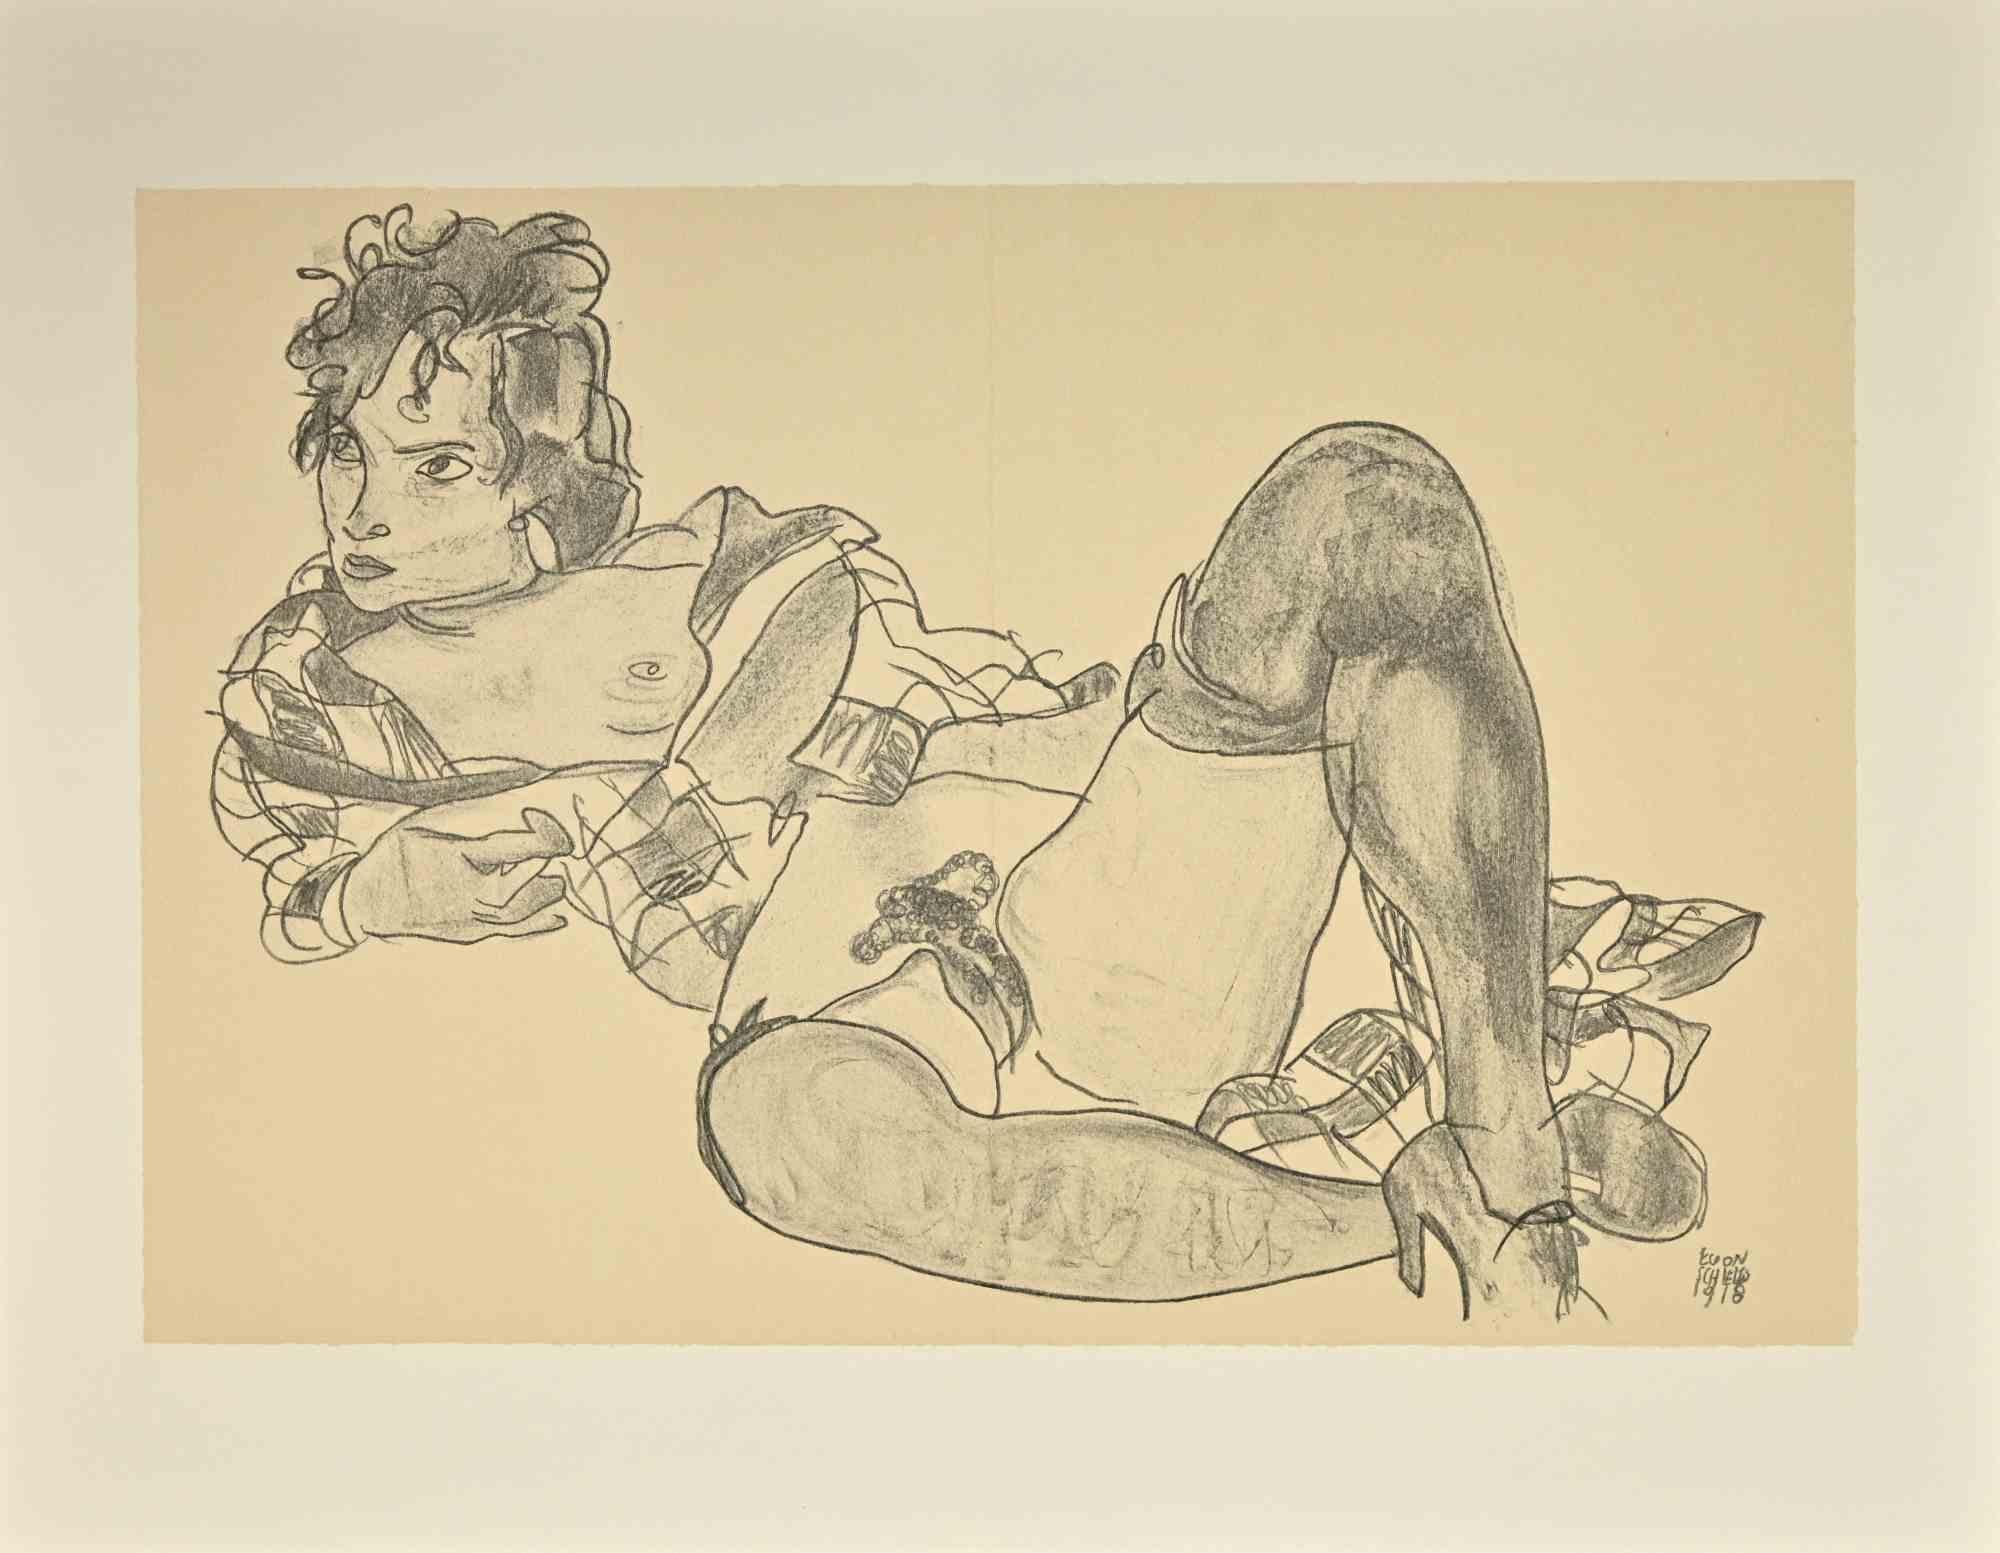 Reclining Woman  is a beautiful lithograph from the portfolio " Erotica " by Egon Schiele.

It is a reproduction of the homonym black crayon drawing, a self-portrait realized by  the Austrian master  in 1918, today preserved at the Albertina Museum